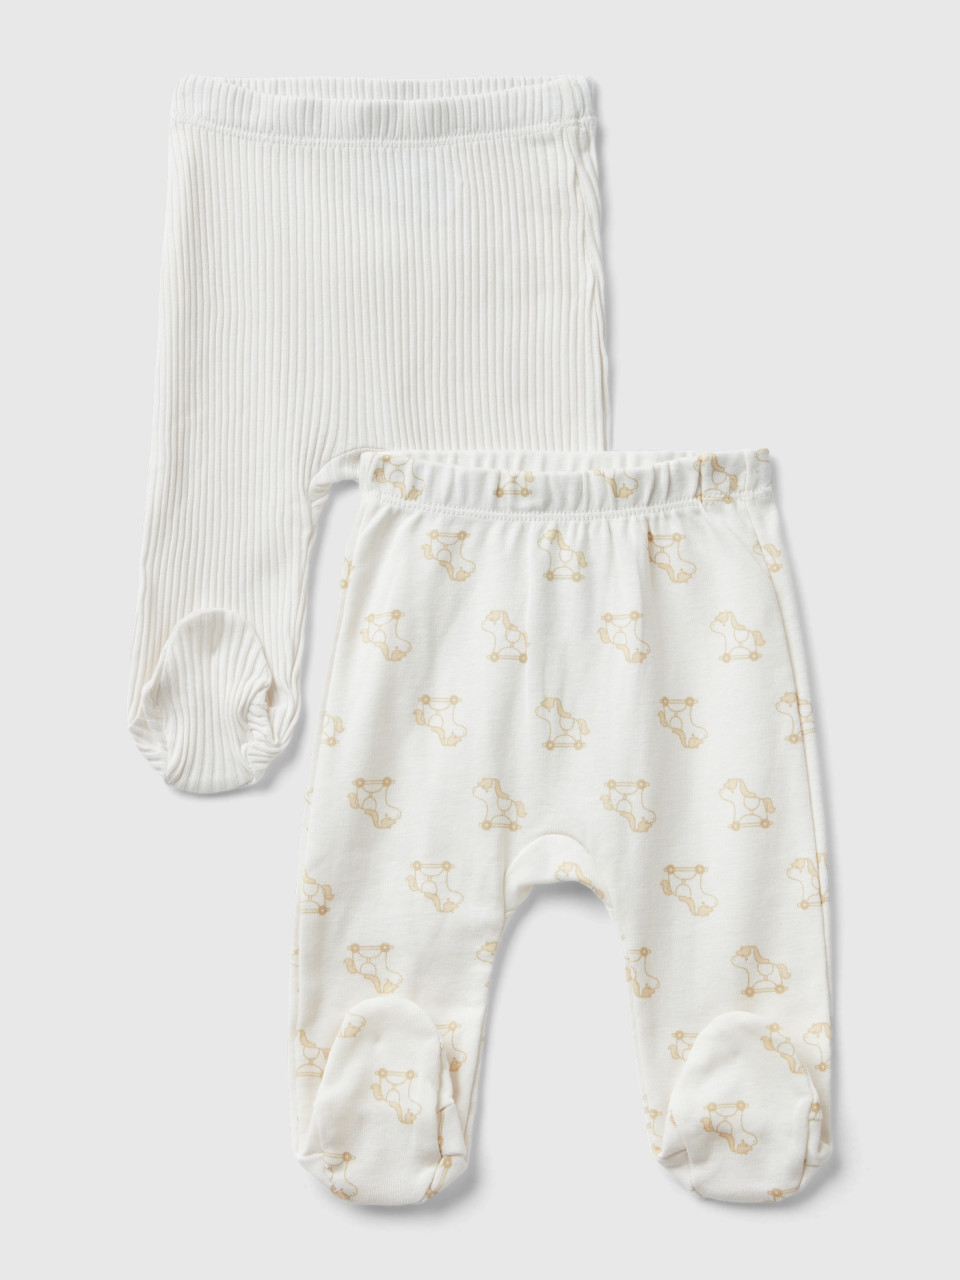 Benetton, Two Pairs Of Trousers In Organic Cotton, Creamy White, Kids